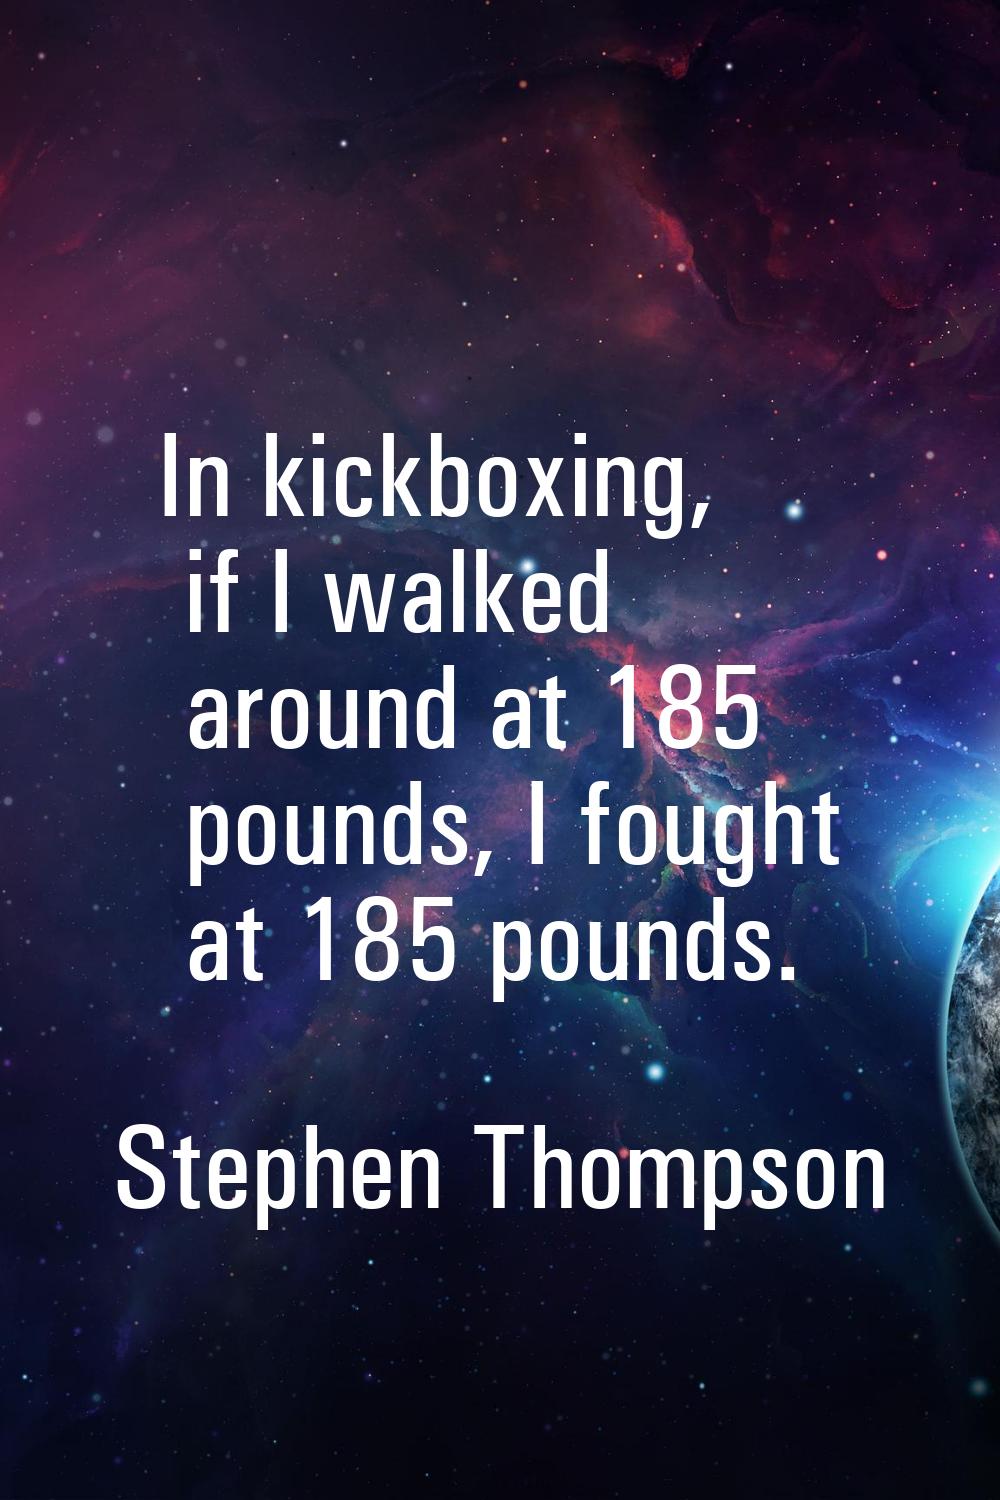 In kickboxing, if I walked around at 185 pounds, I fought at 185 pounds.